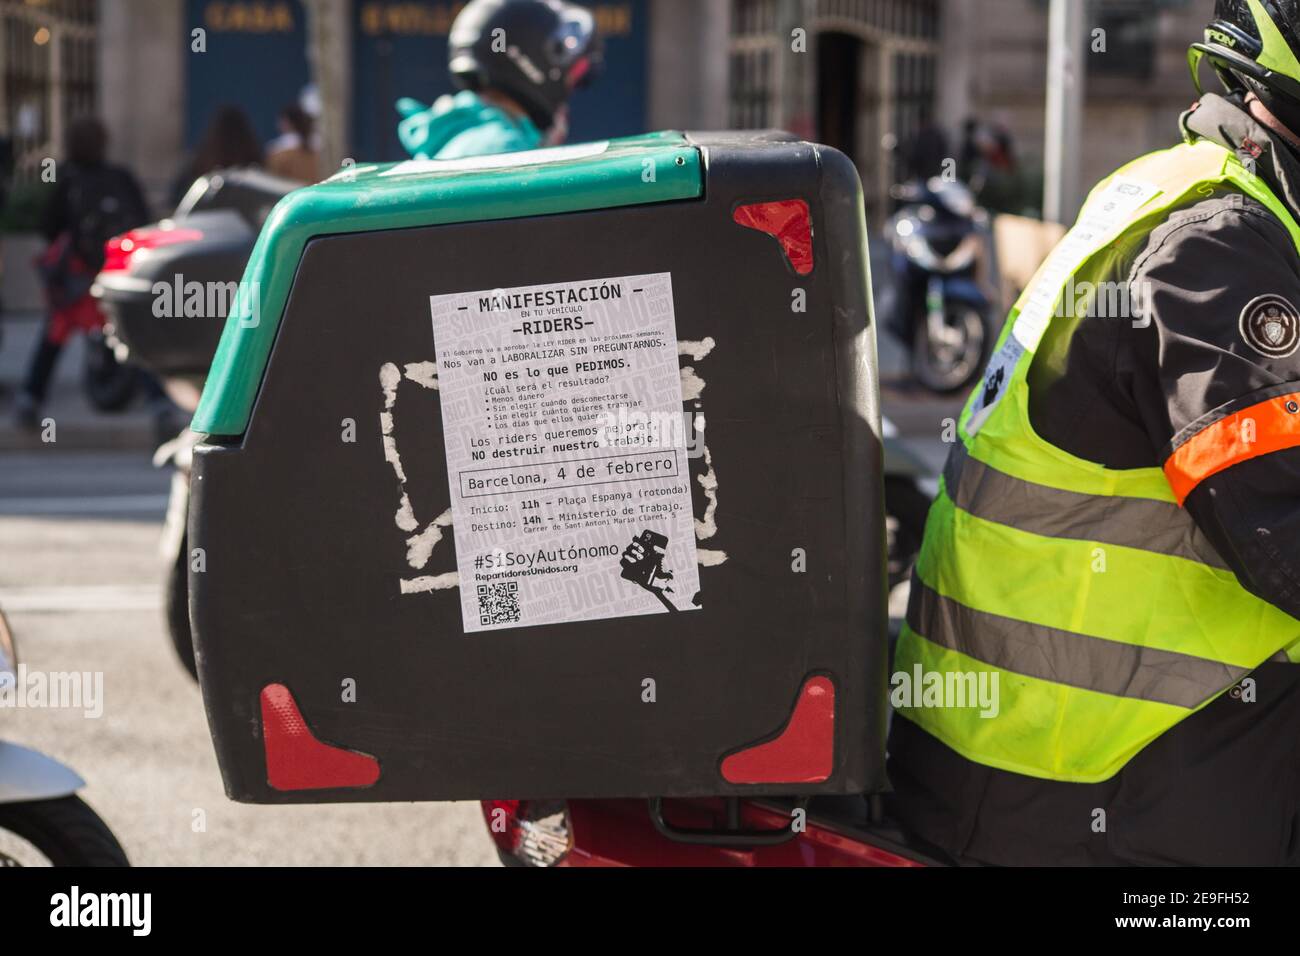 Glovo Delivery Bag High Resolution Stock Photography and Images - Alamy